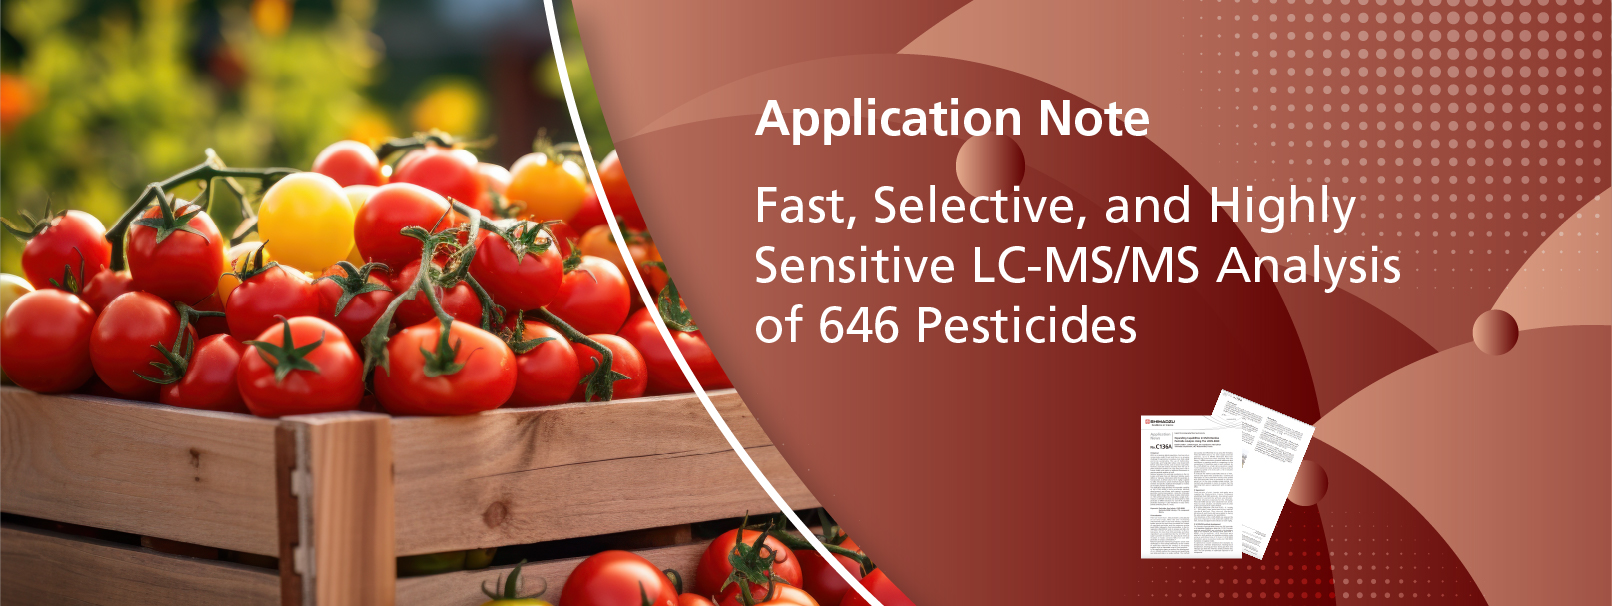 Fast, Selective, and Highly Sensitive LC-MS/MS Analysis of 646 Pesticides